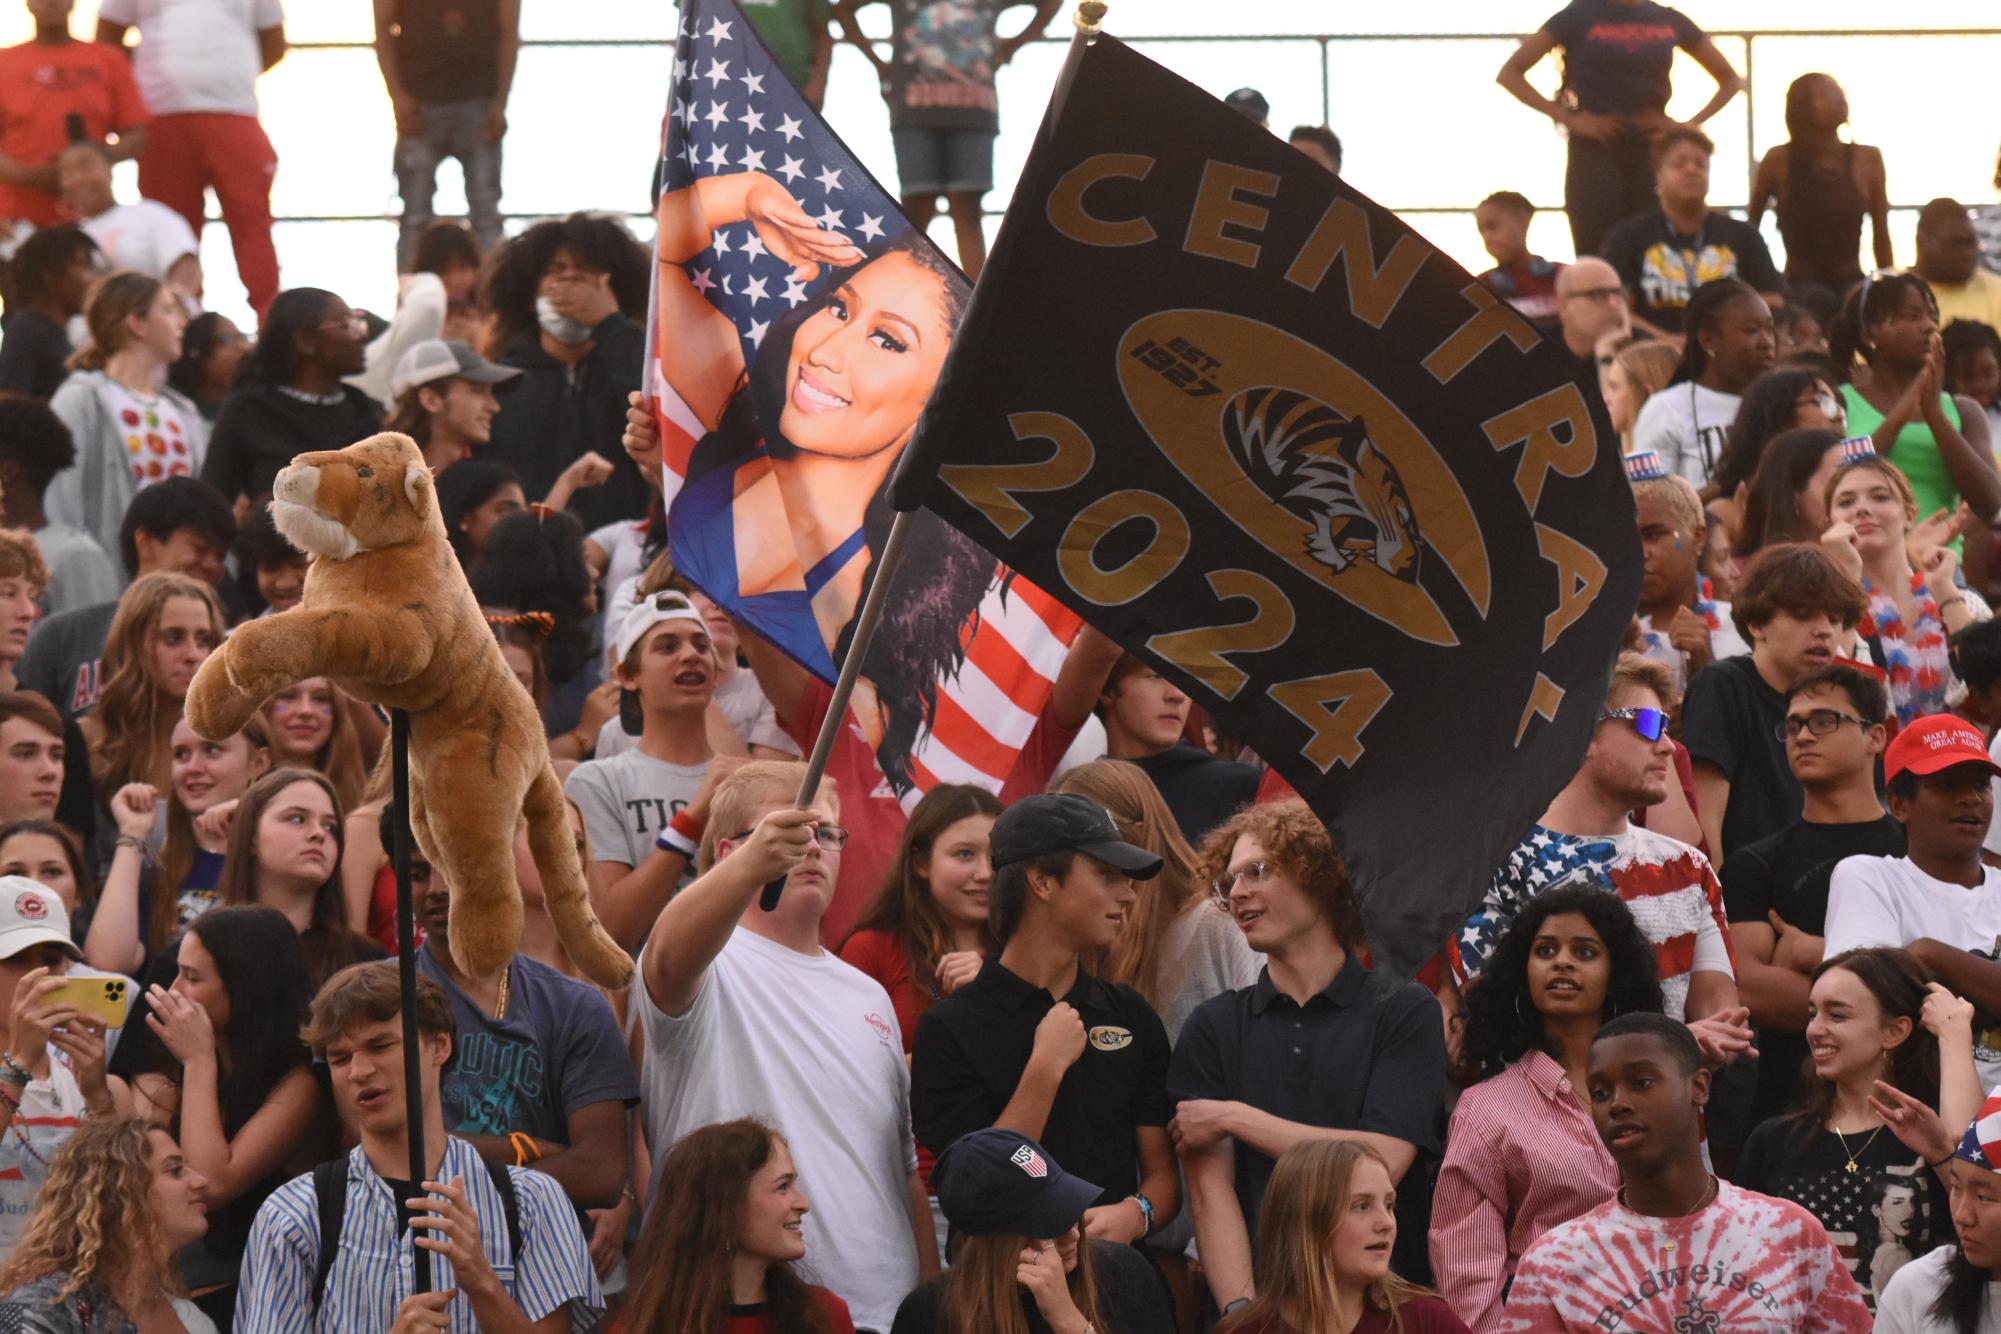 The schools student section brought flags to participate in the theme, USA for the Sept. 1 game. 